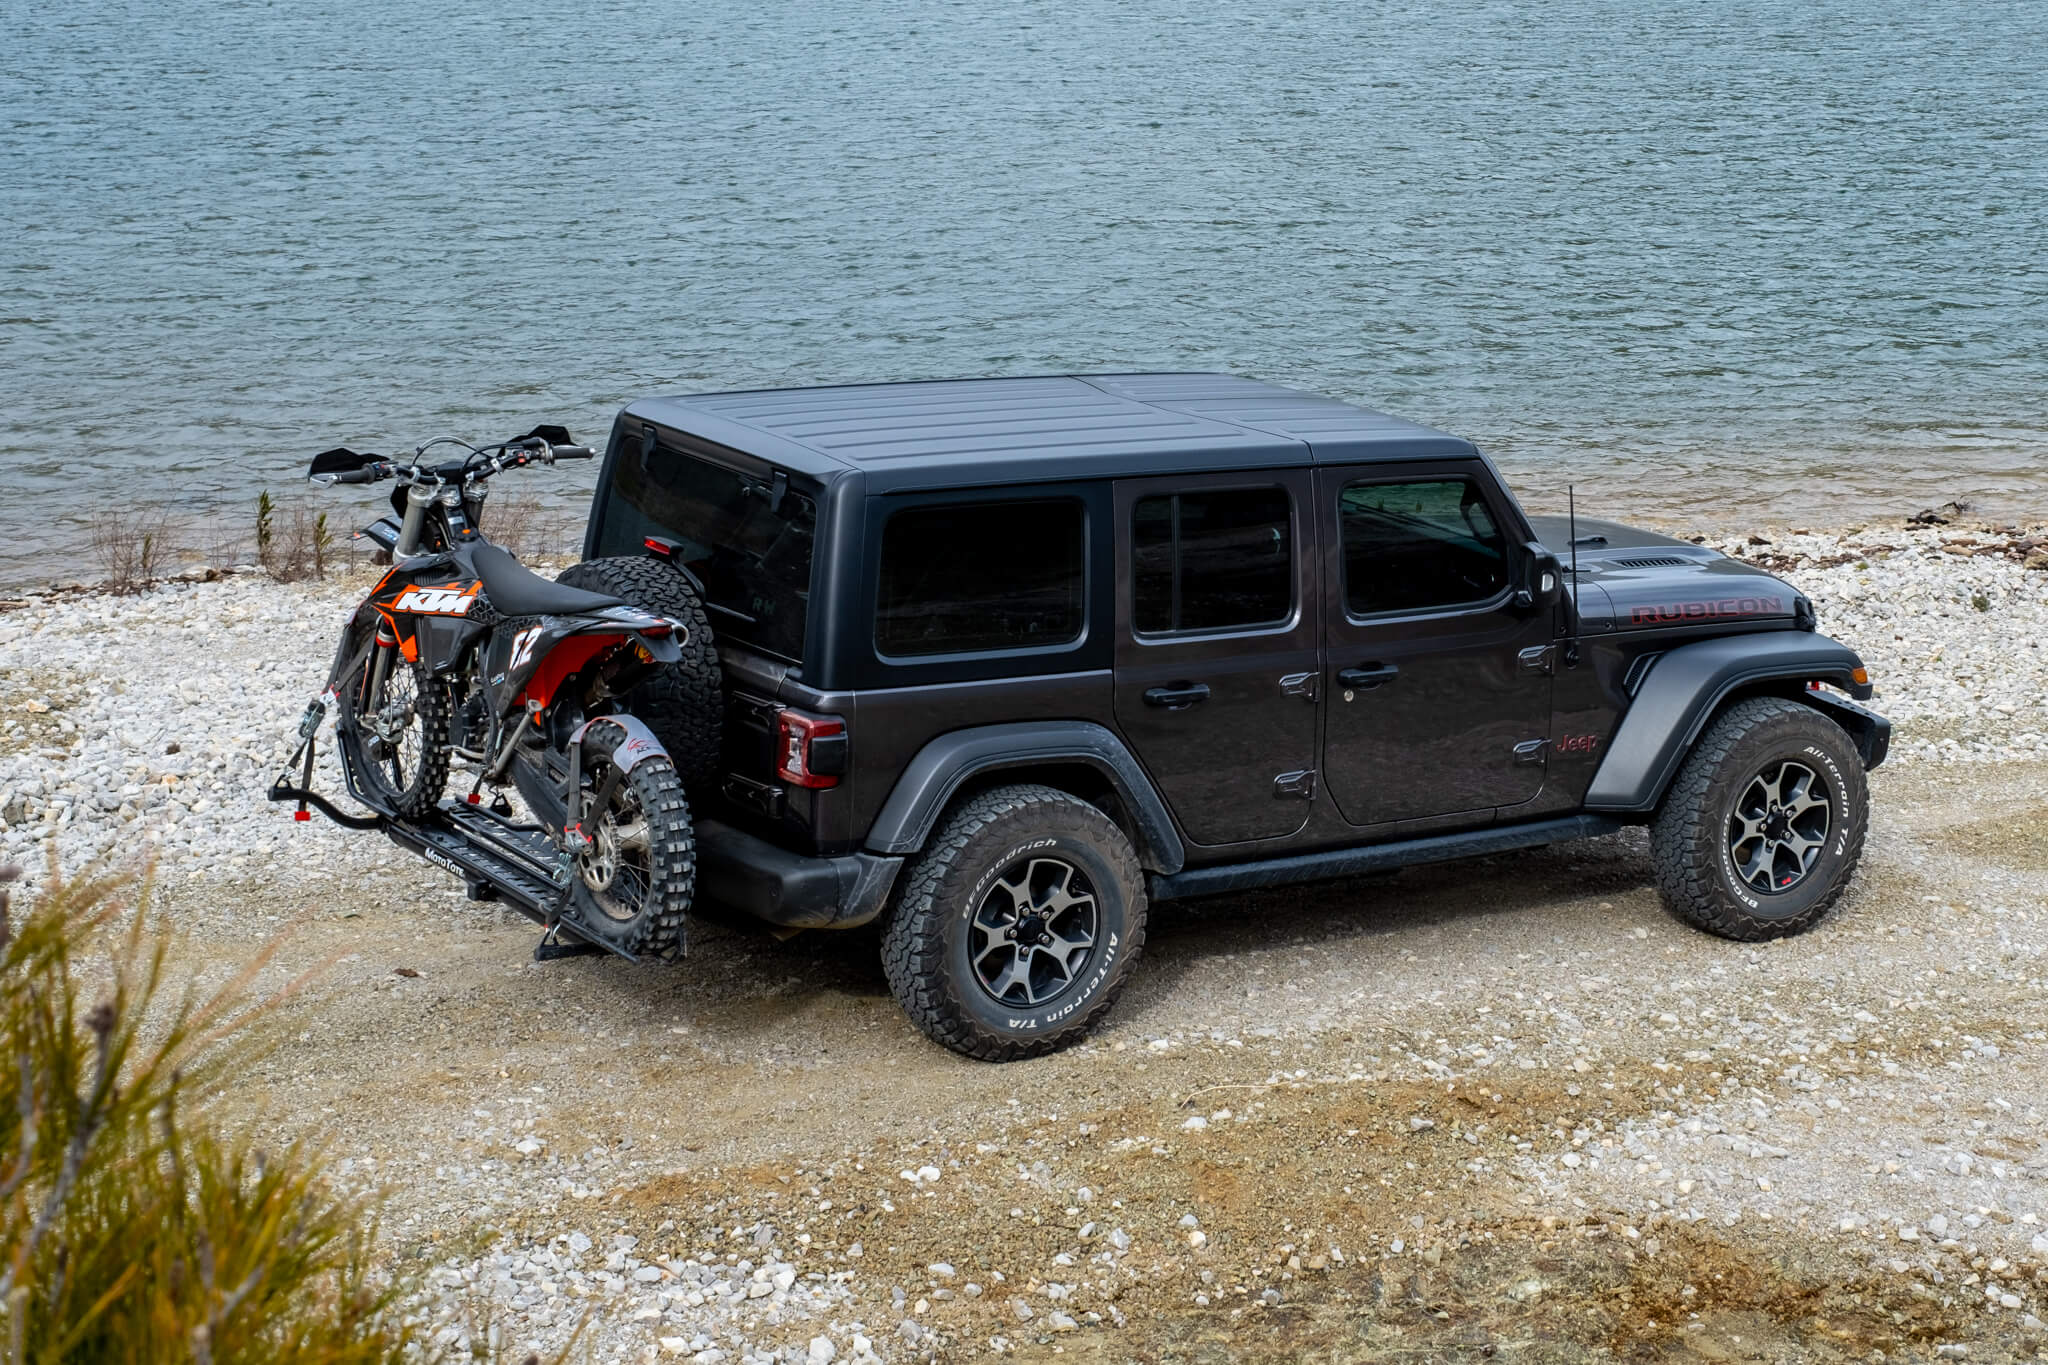 KTM Dual Sport Hitch Mount Motorcycle Carrier on a a Jeep Wrangler